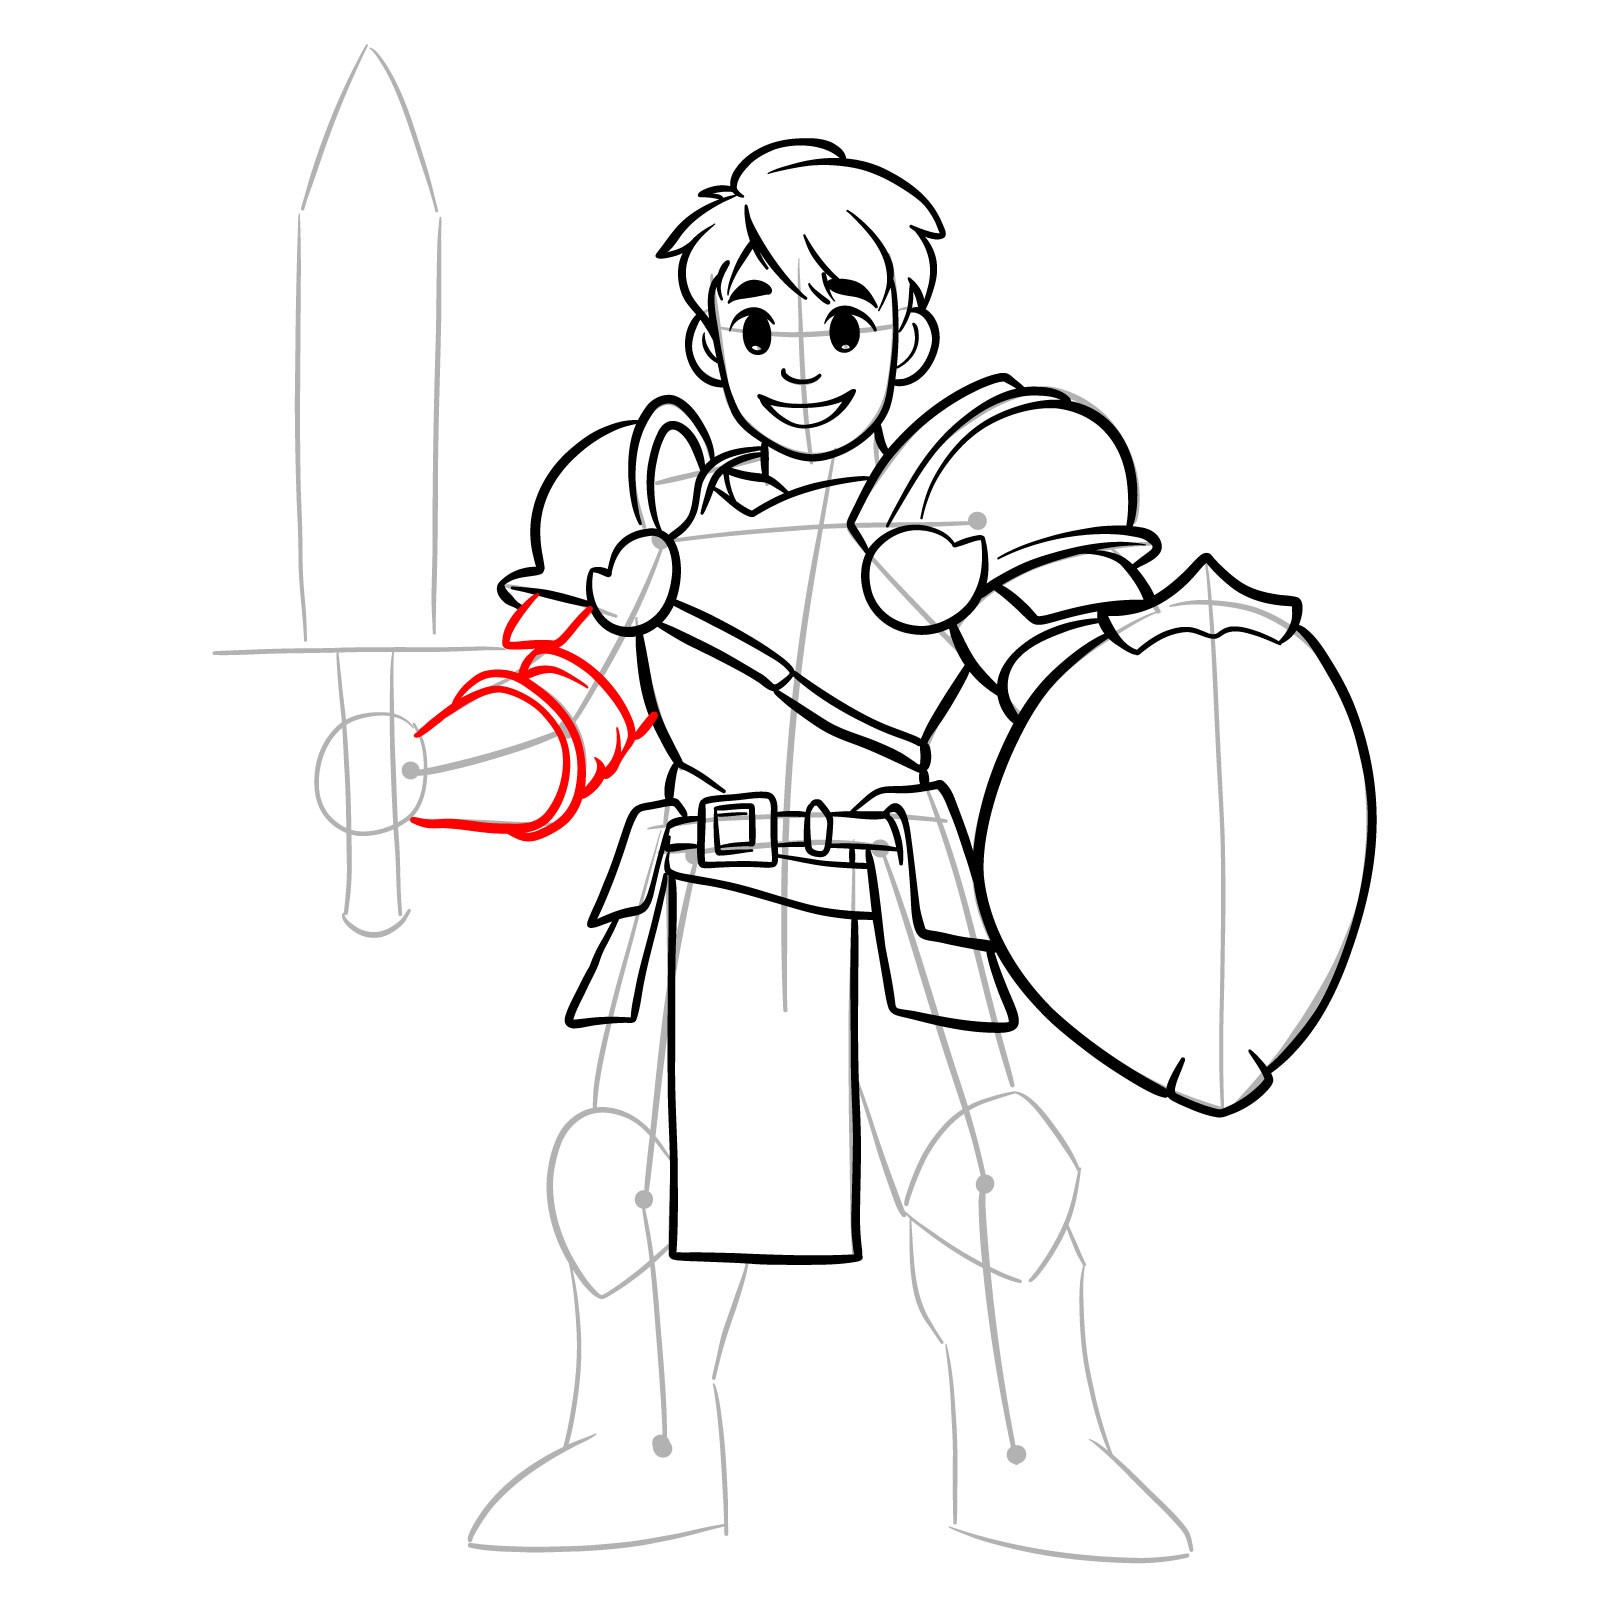 Easy paladin drawing step 14: sketching second hand